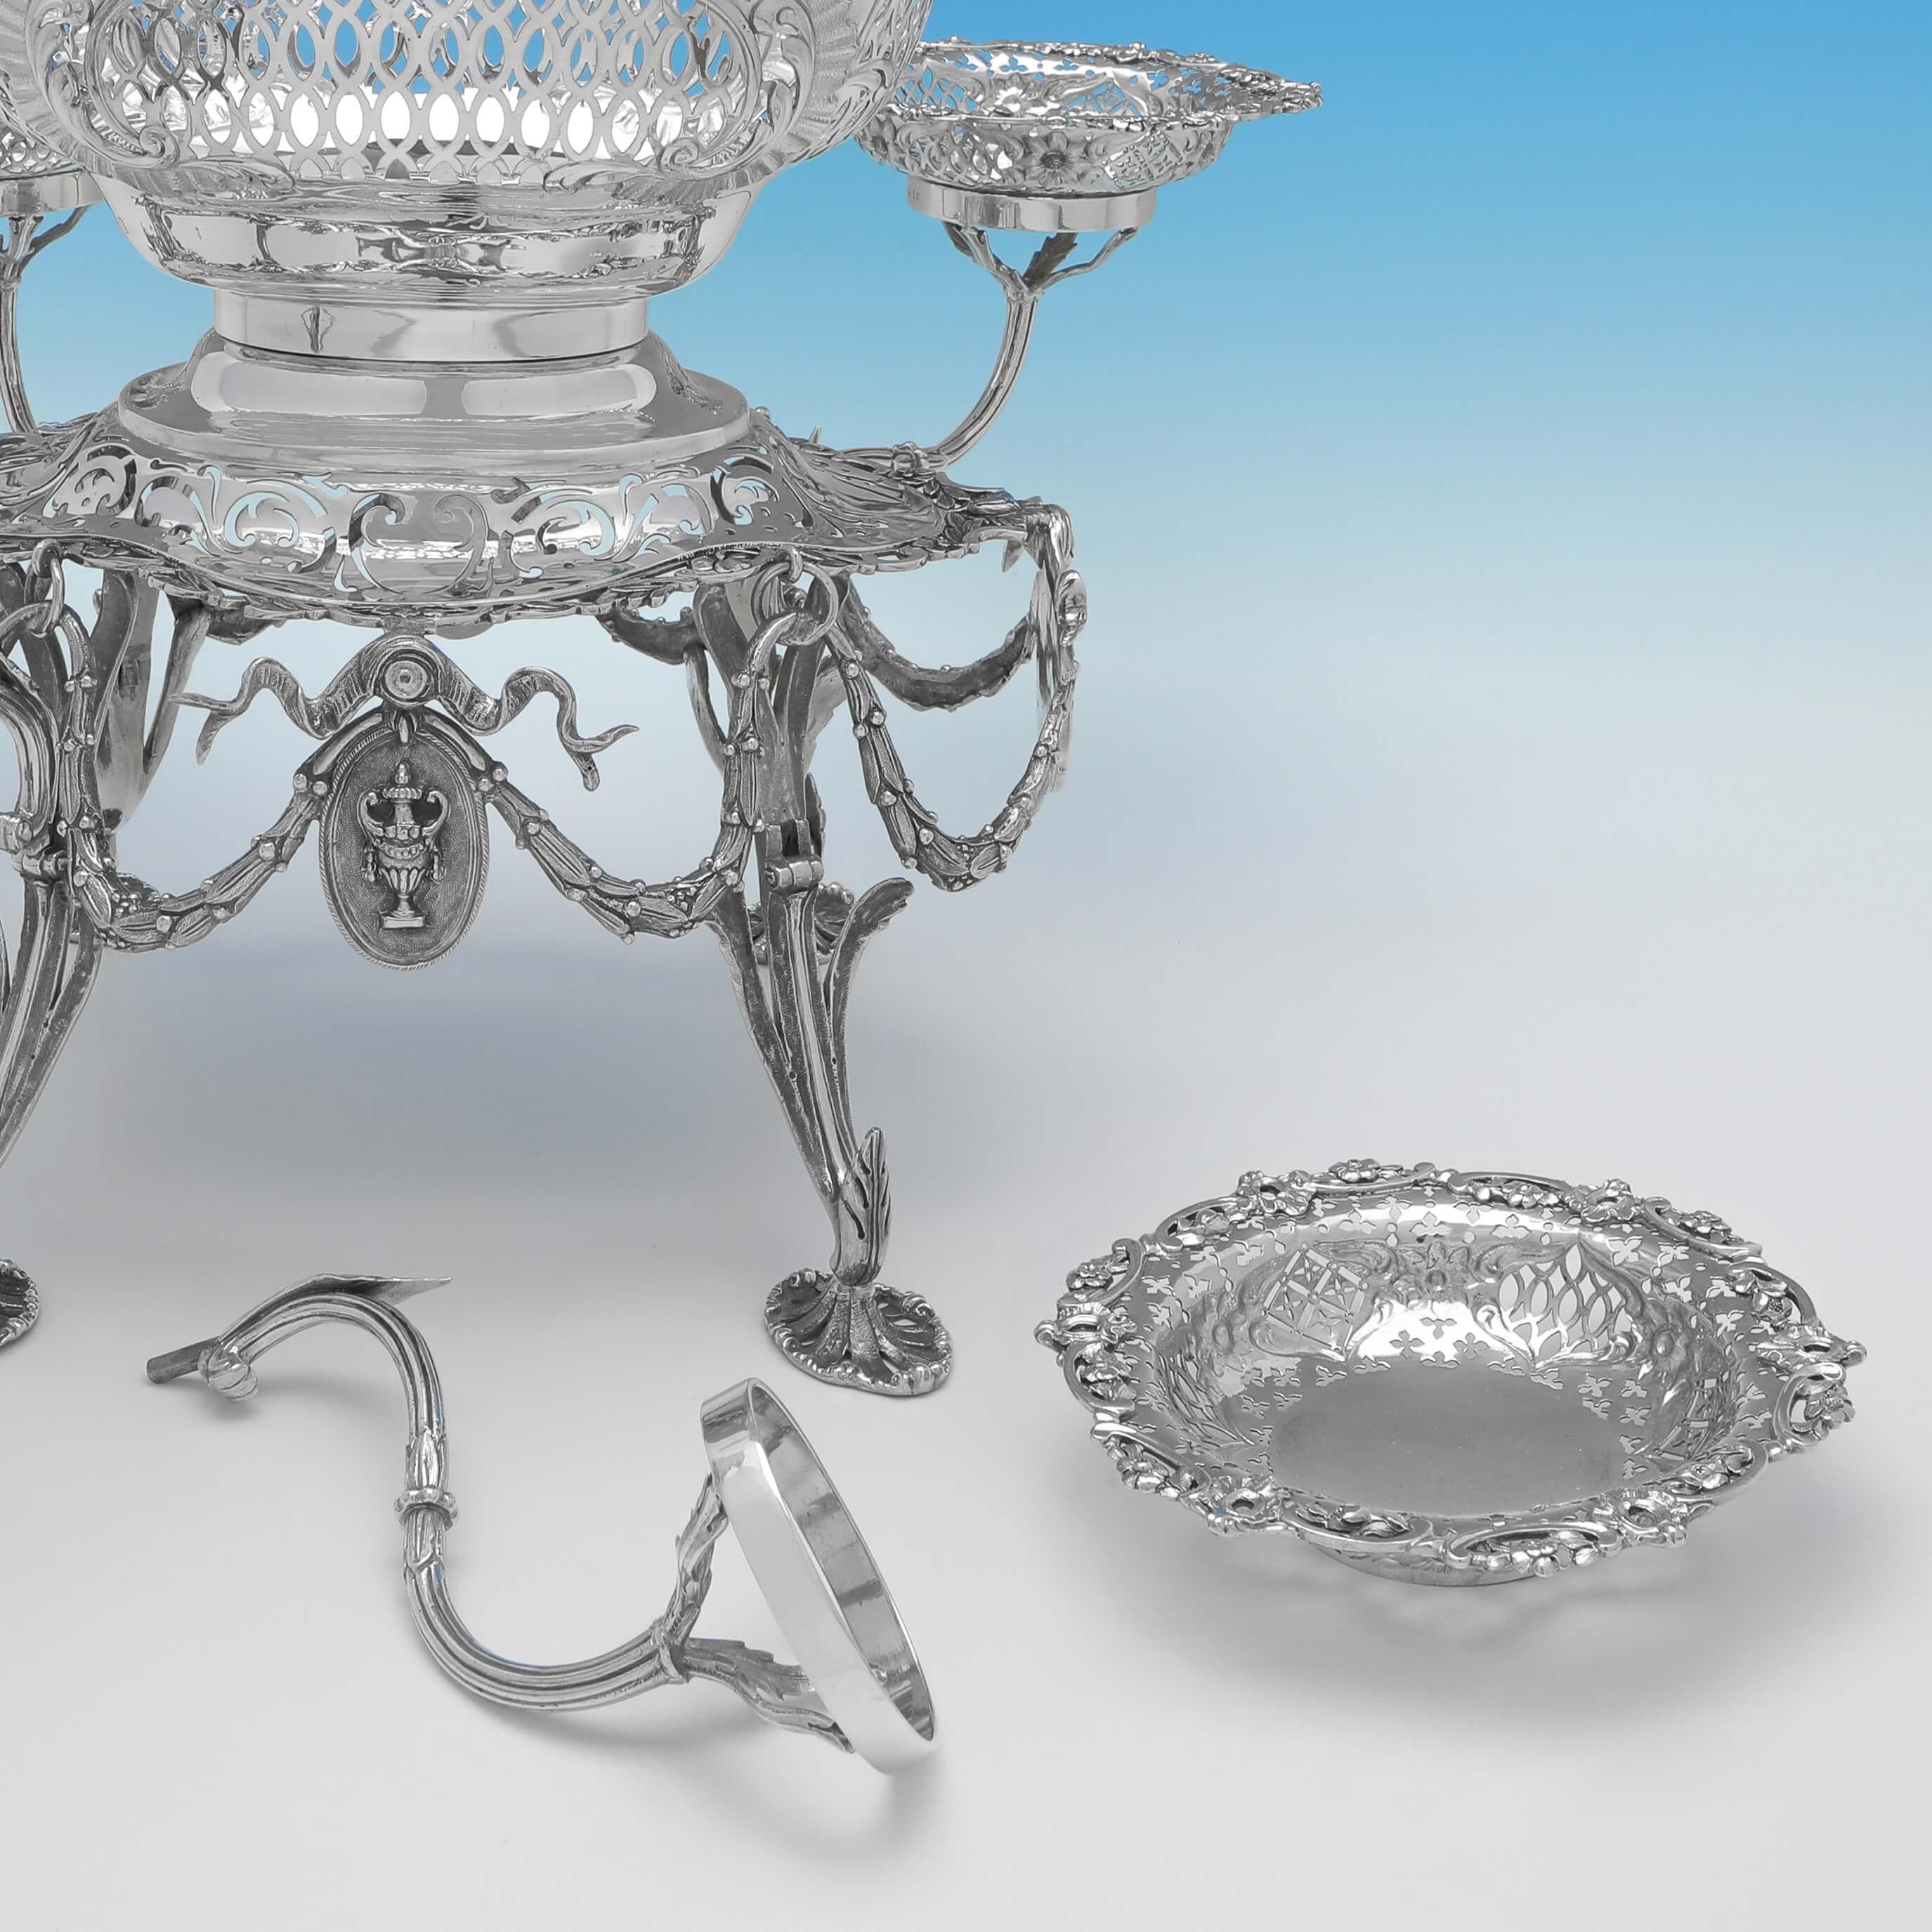 Neoclassical Revival Antique Edwardian Sterling Silver Centrepiece Epergne, 1910 For Sale 1